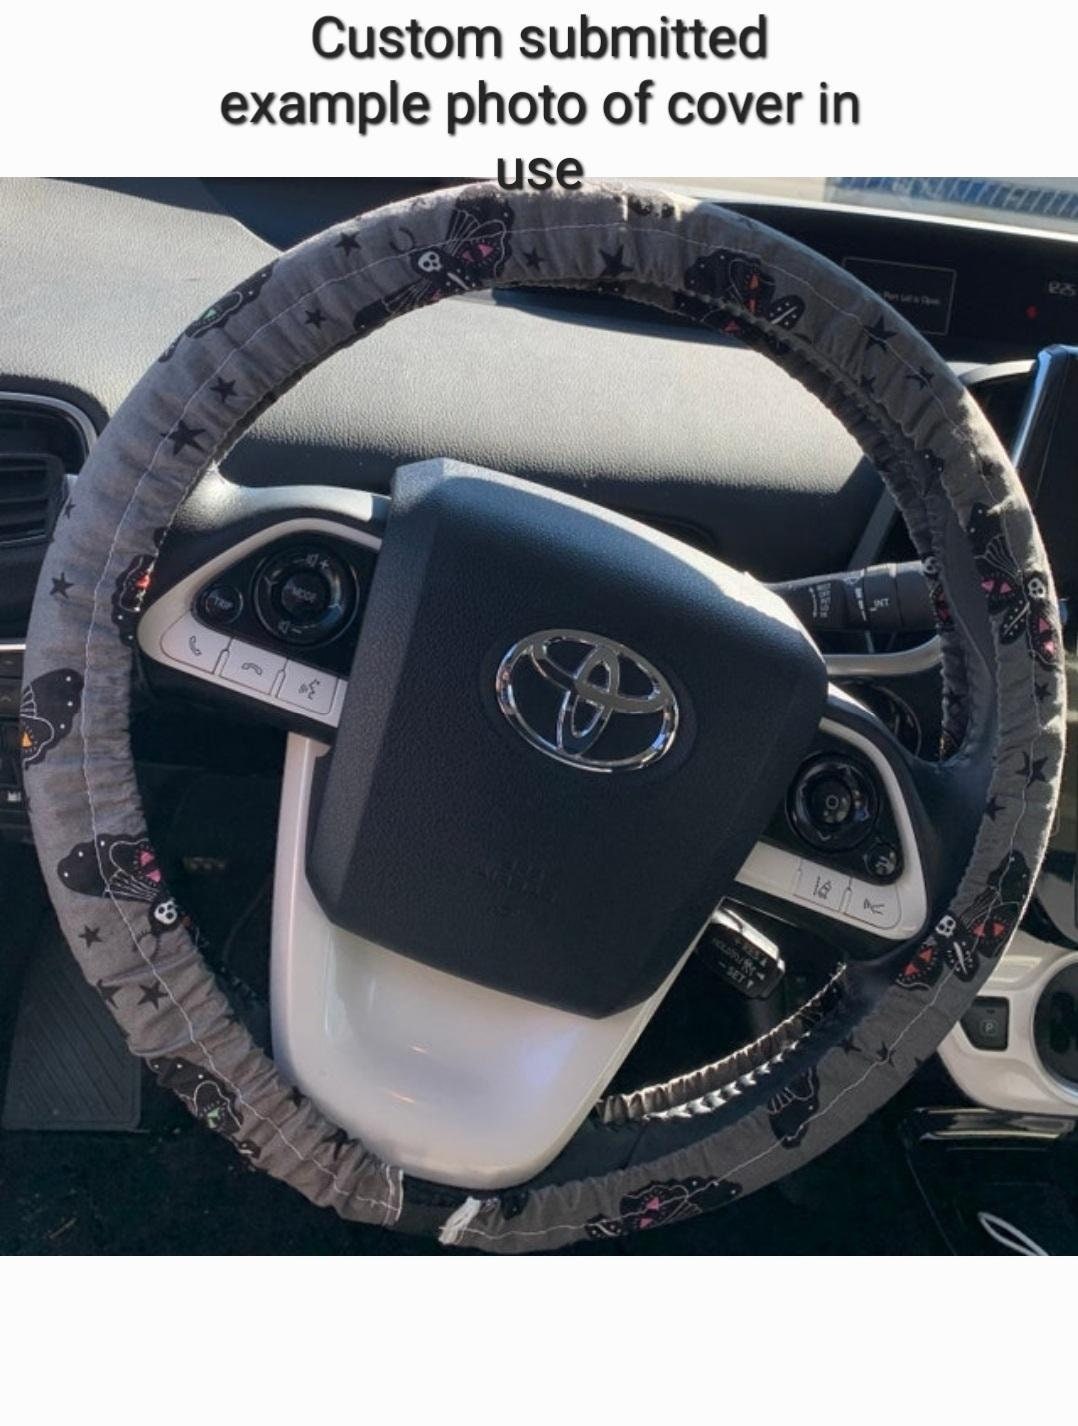 Steering Wheel Cover made with Licensed HP Fabric - Harlow's Store and Garden Gifts